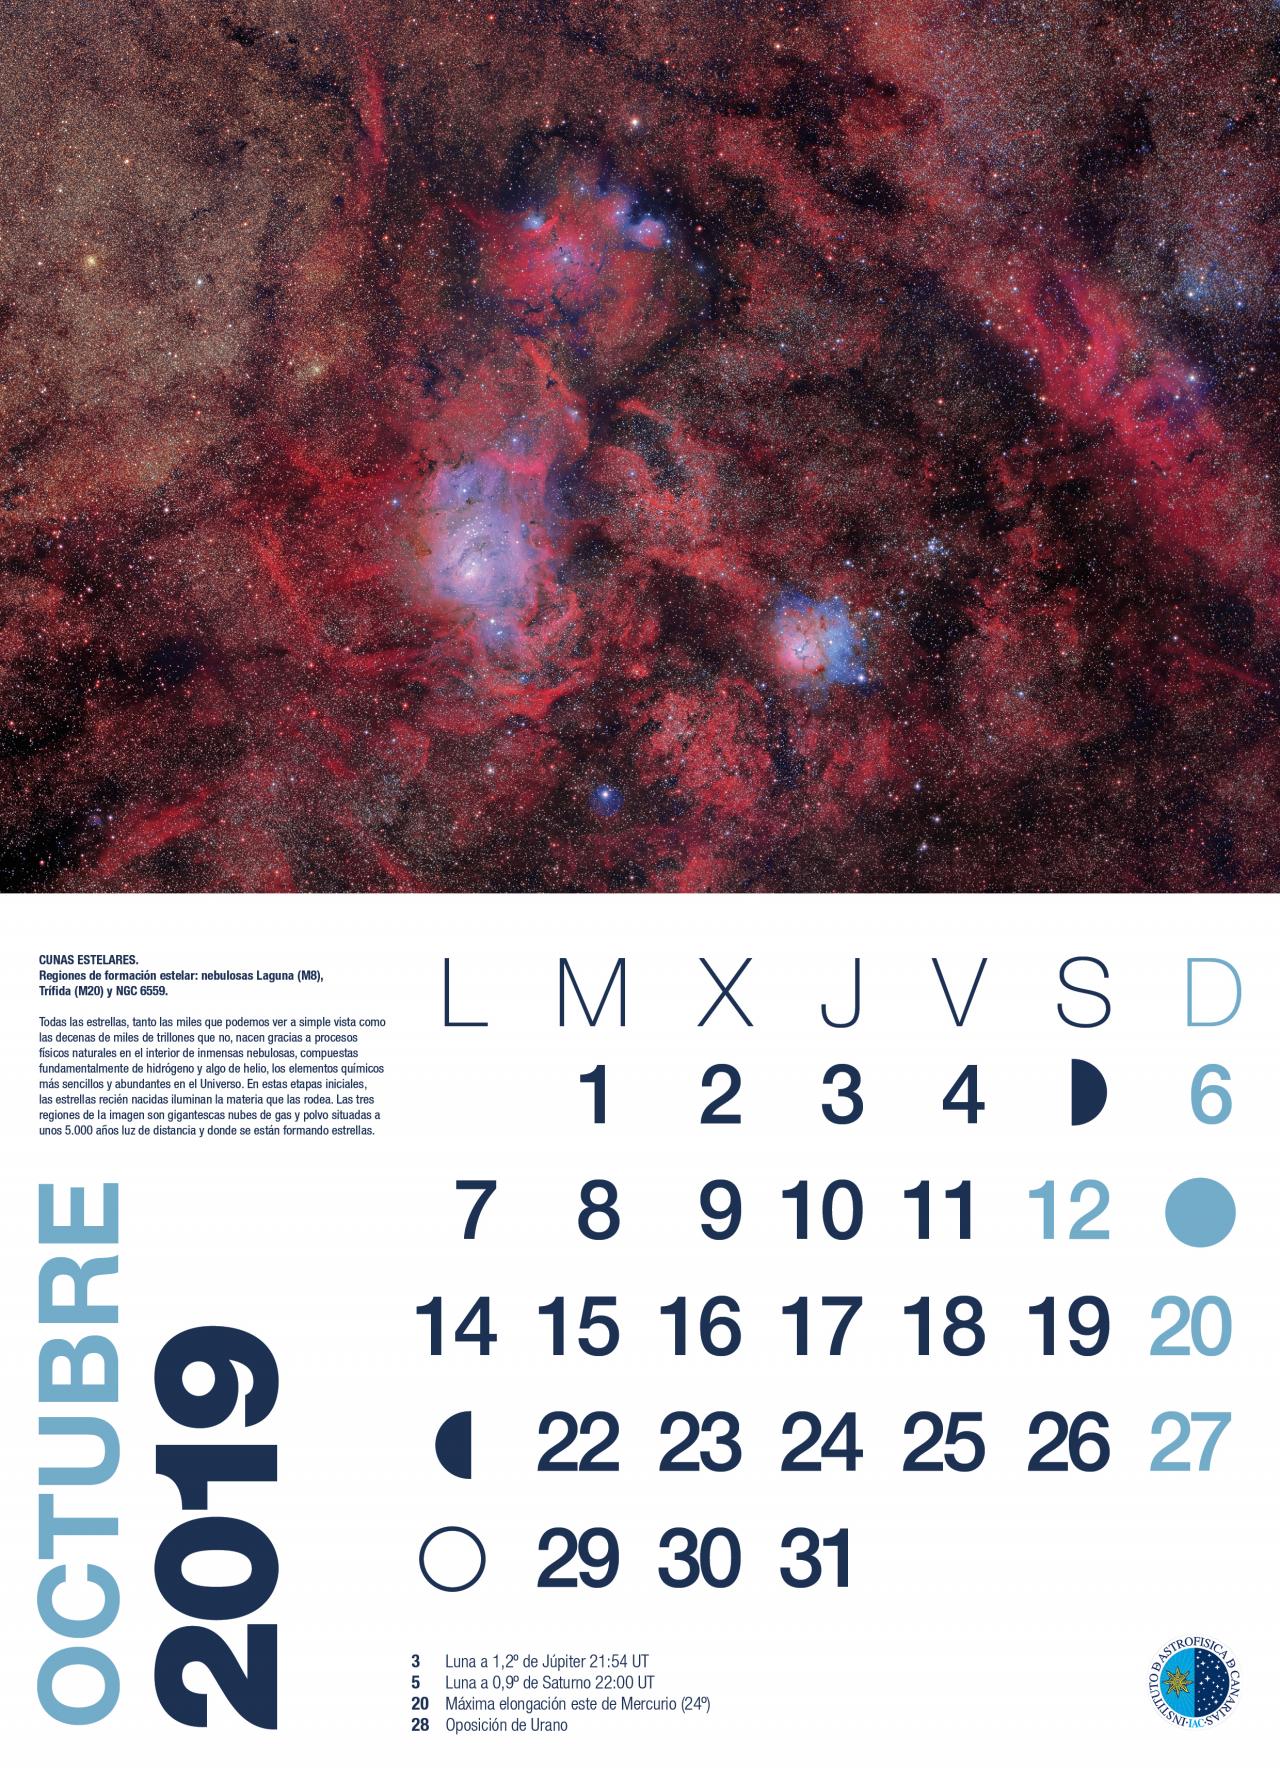 October 2019 in the 100 Square Moons calendar 